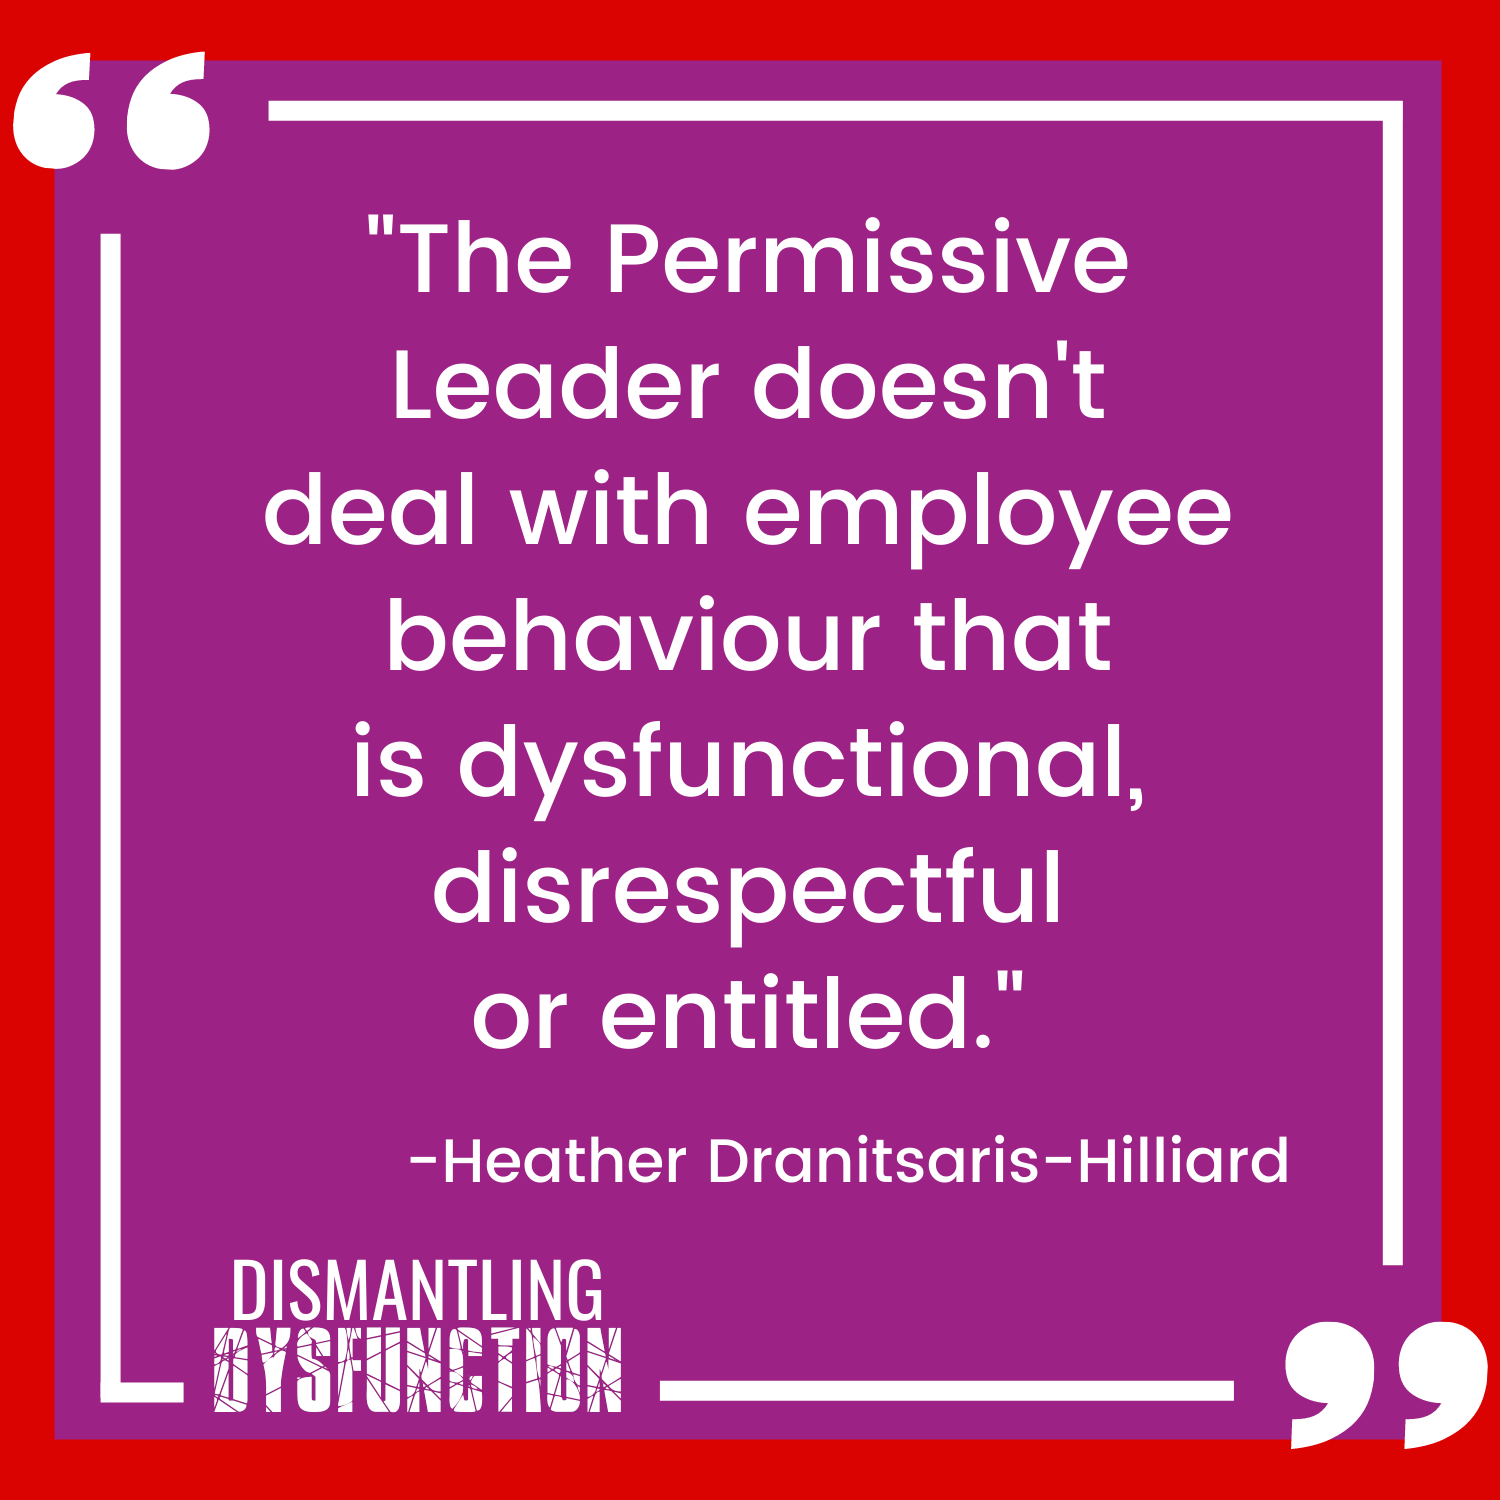 As autocratic leaders need to be in control, they make their people into minions and then complain about them - Heather Dranitsaris-Hilliard quote